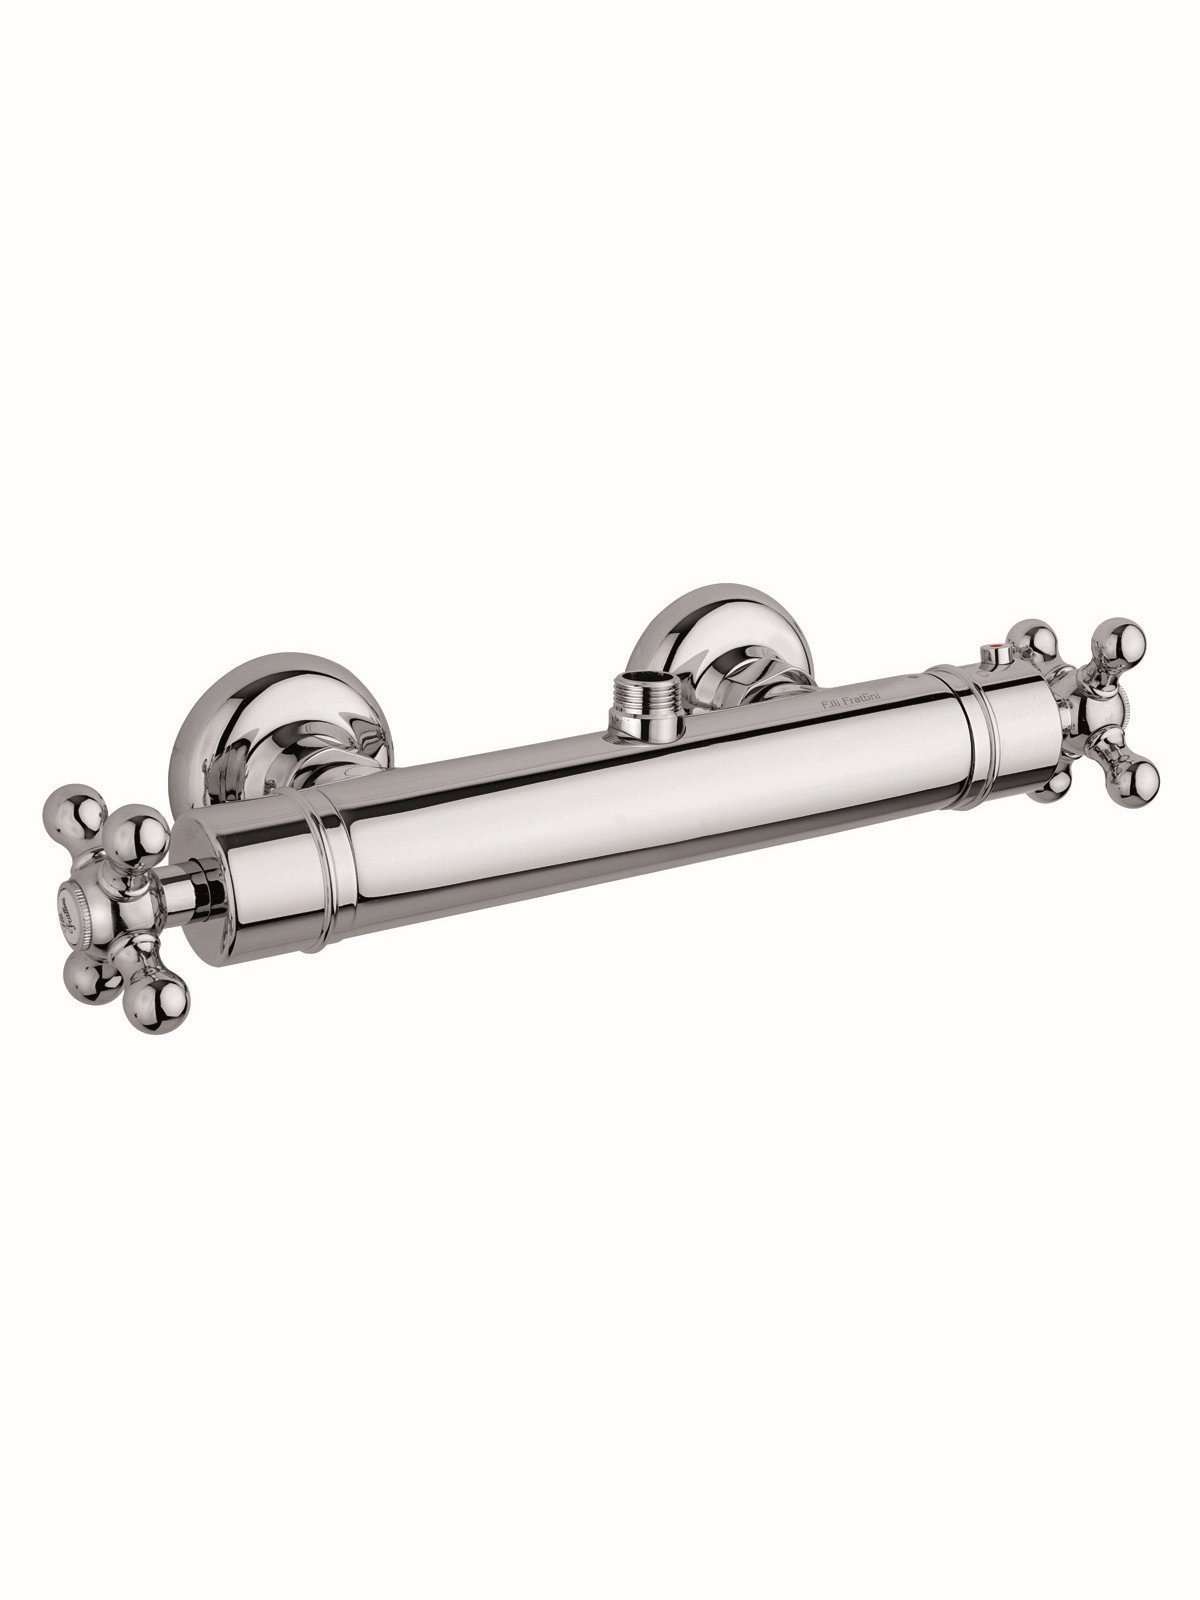 External thermostatic shower mixer, cold body, upper connection